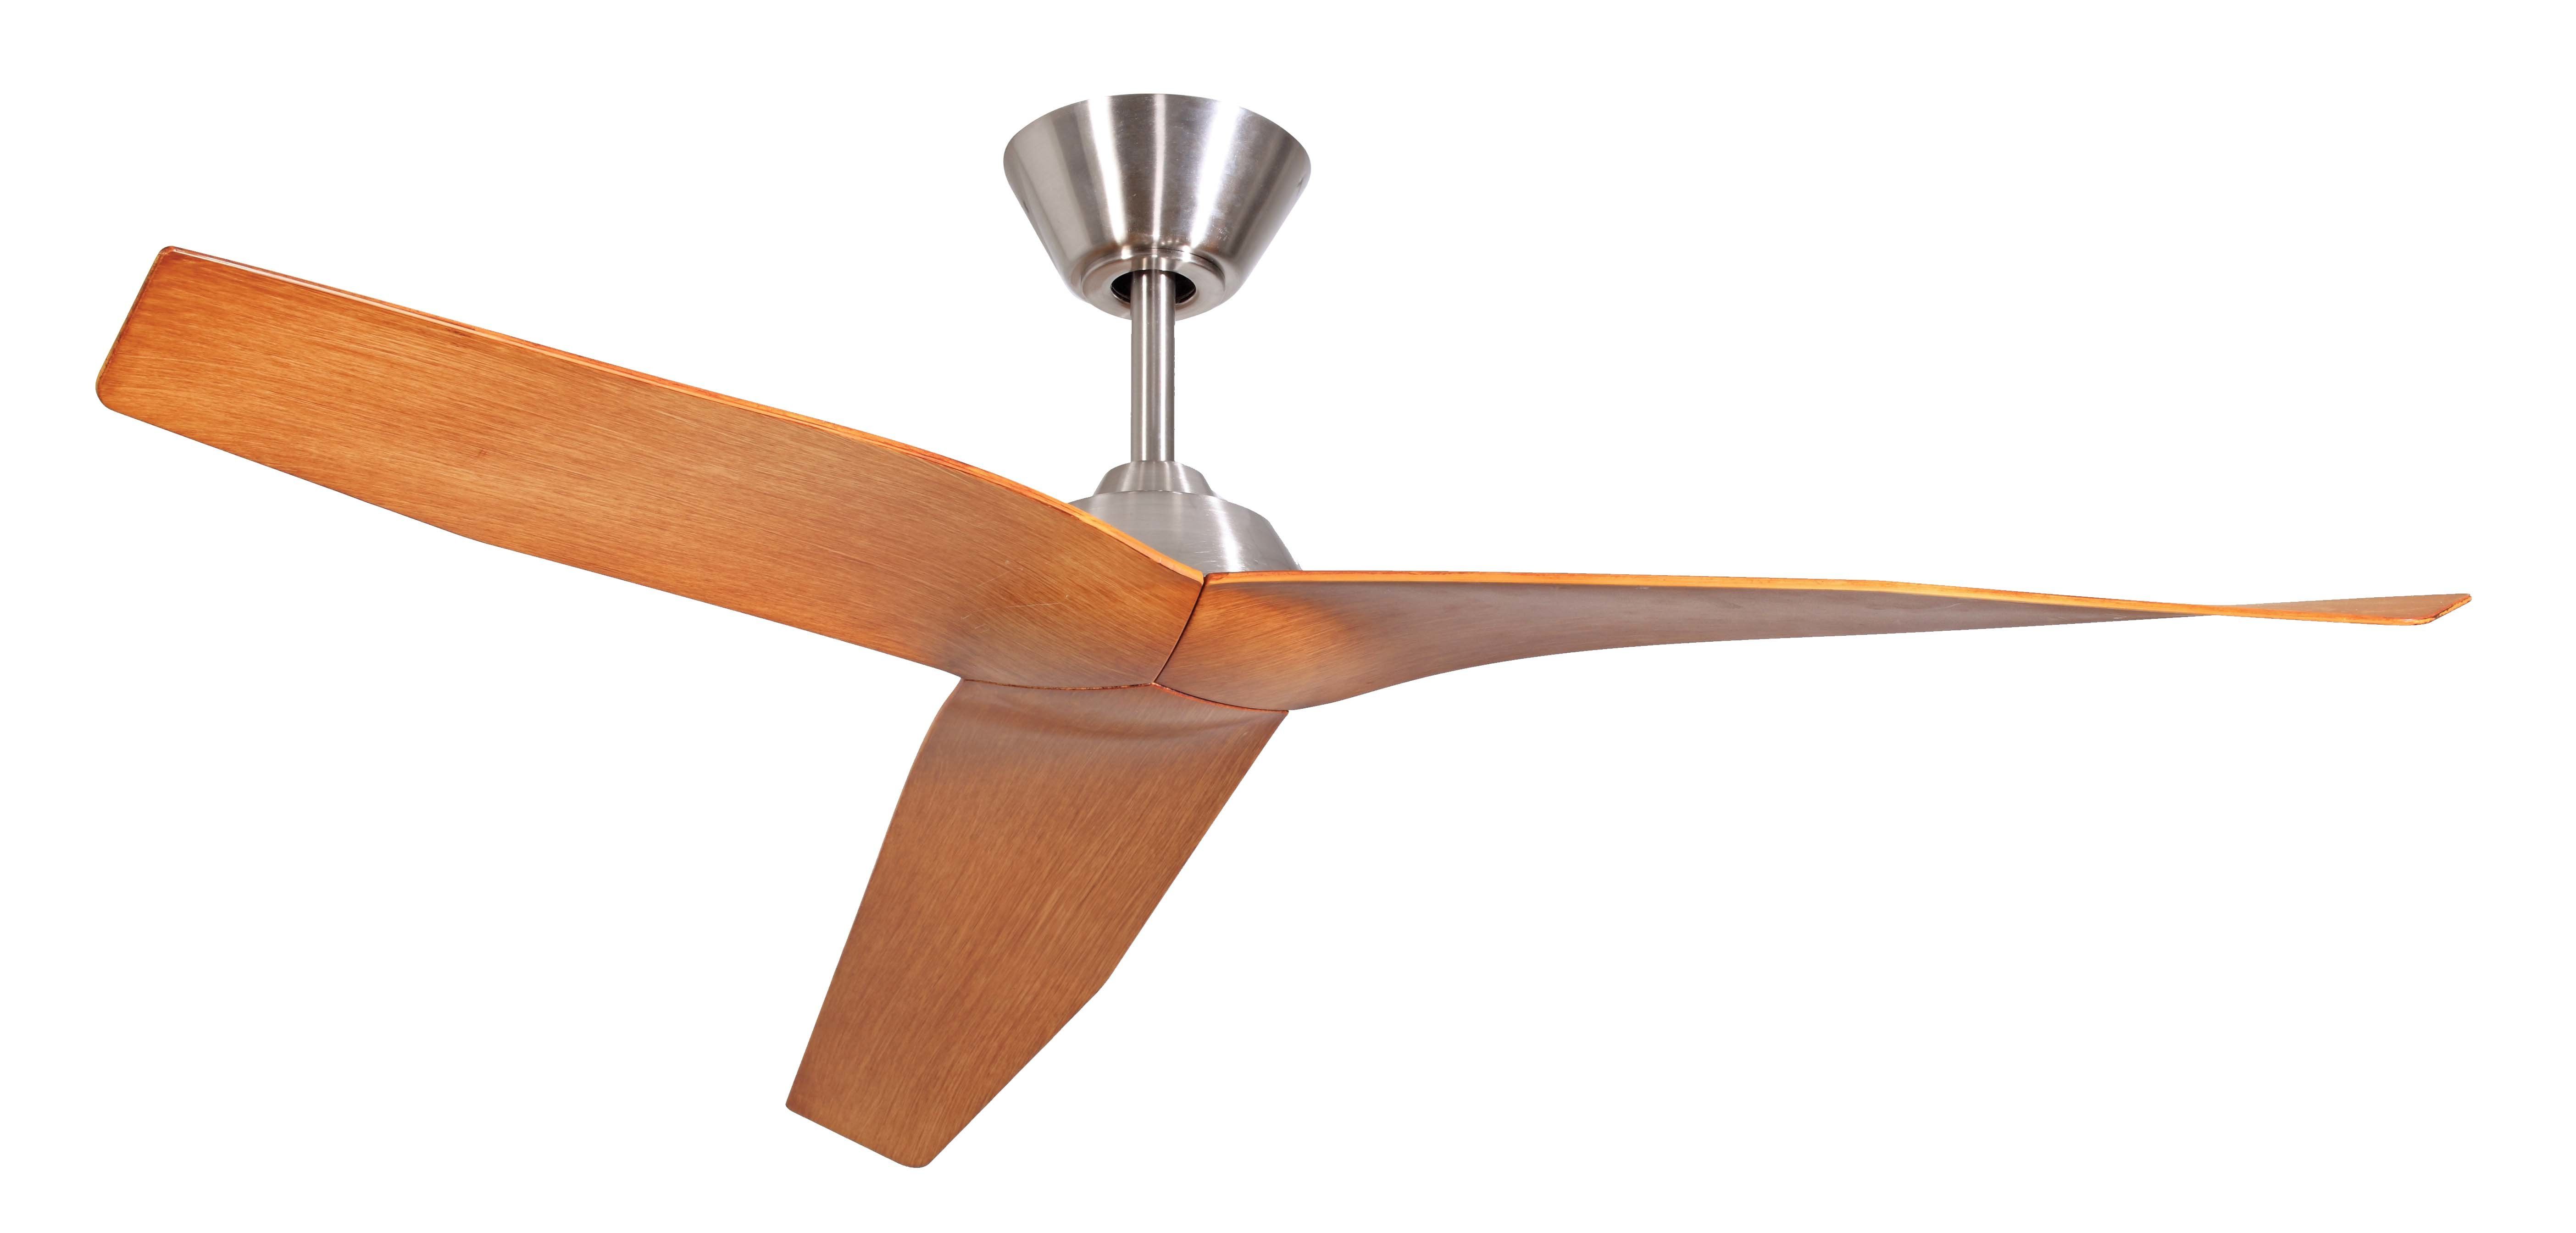 Brayden Studio 48" Brabham 3 Blade Ceiling Fan With Remote In Best And Newest Troxler 3 Blade Ceiling Fans (View 15 of 20)